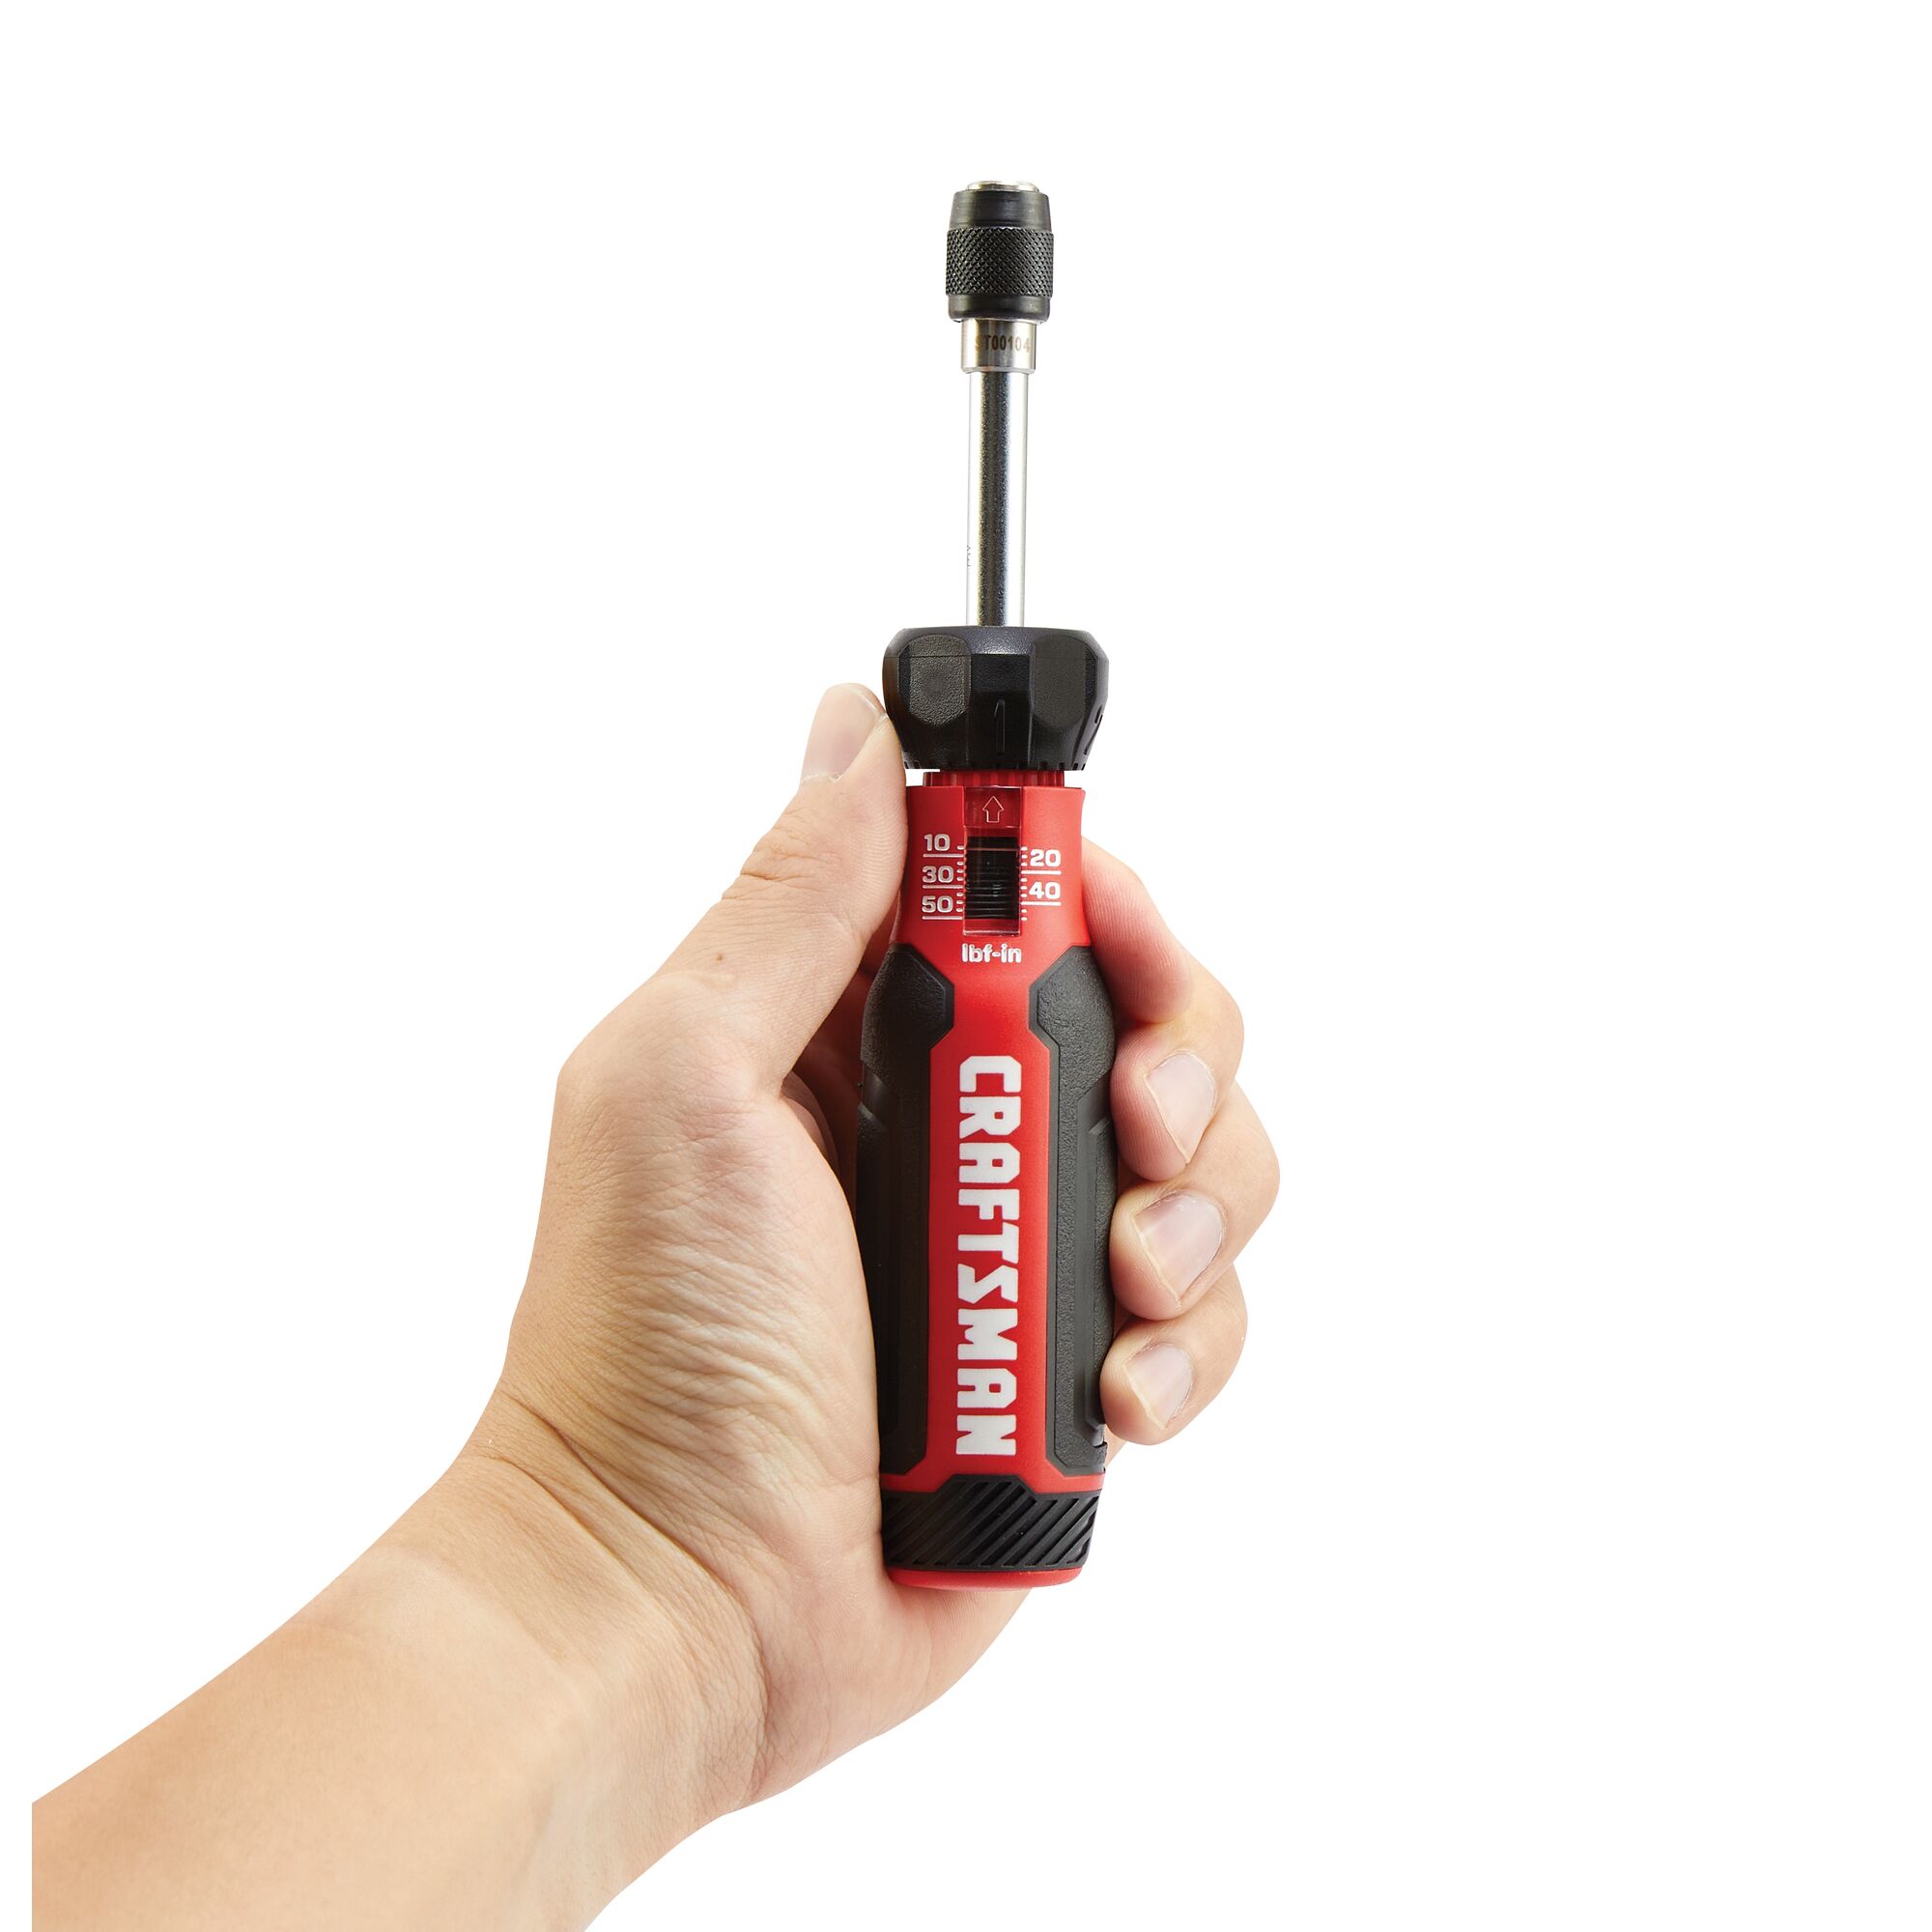 View of CRAFTSMAN Screwdrivers highlighting product features